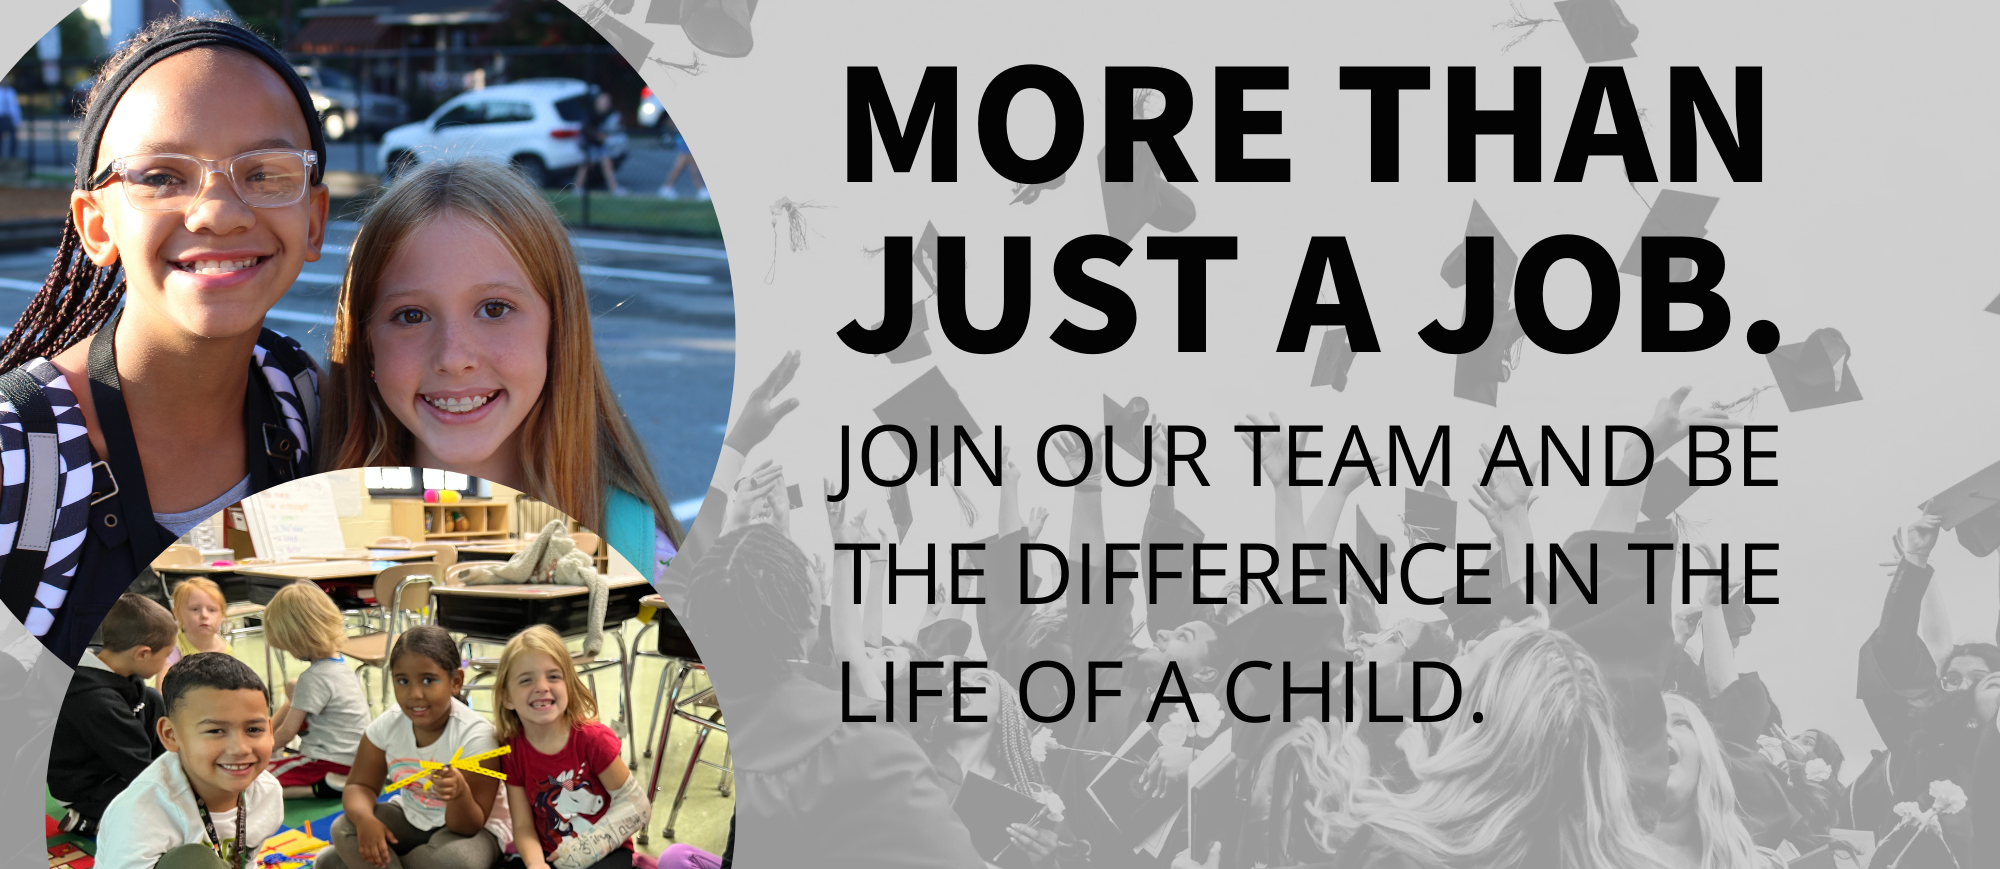 More than just a job. Be the difference in the life of a child.